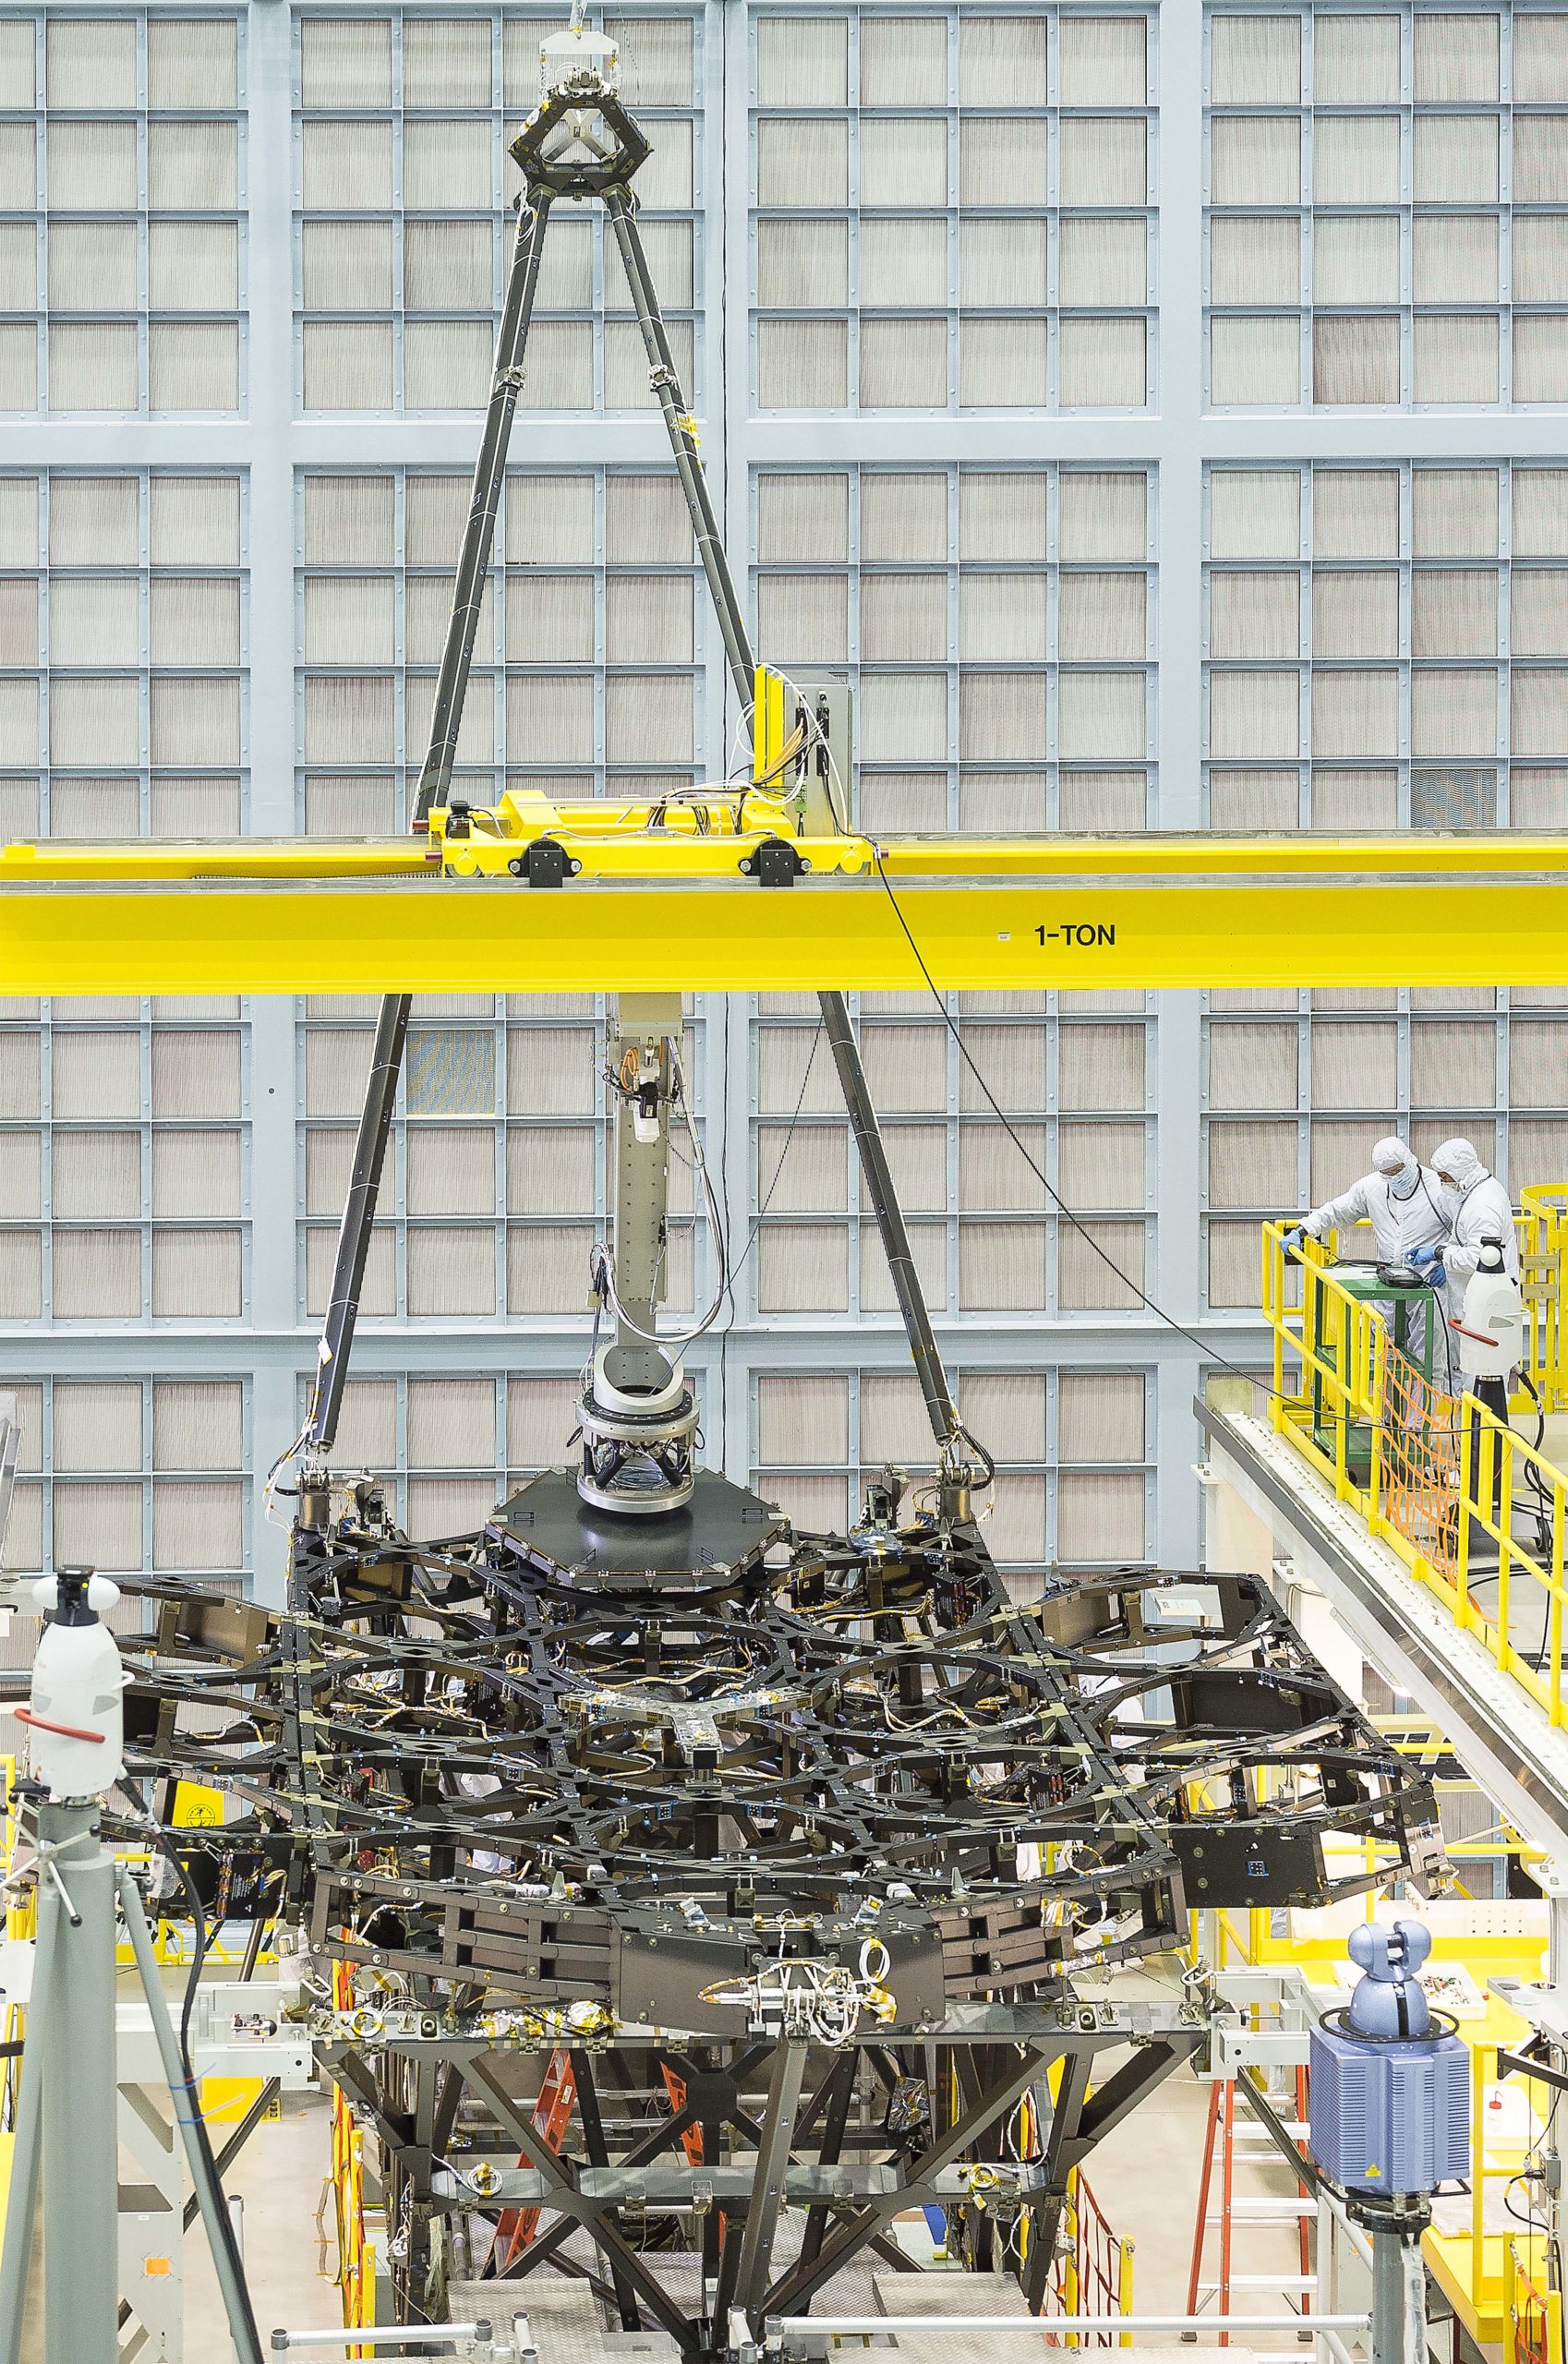 The James Webb Space Telescope’s First Mirror Has Been Installed